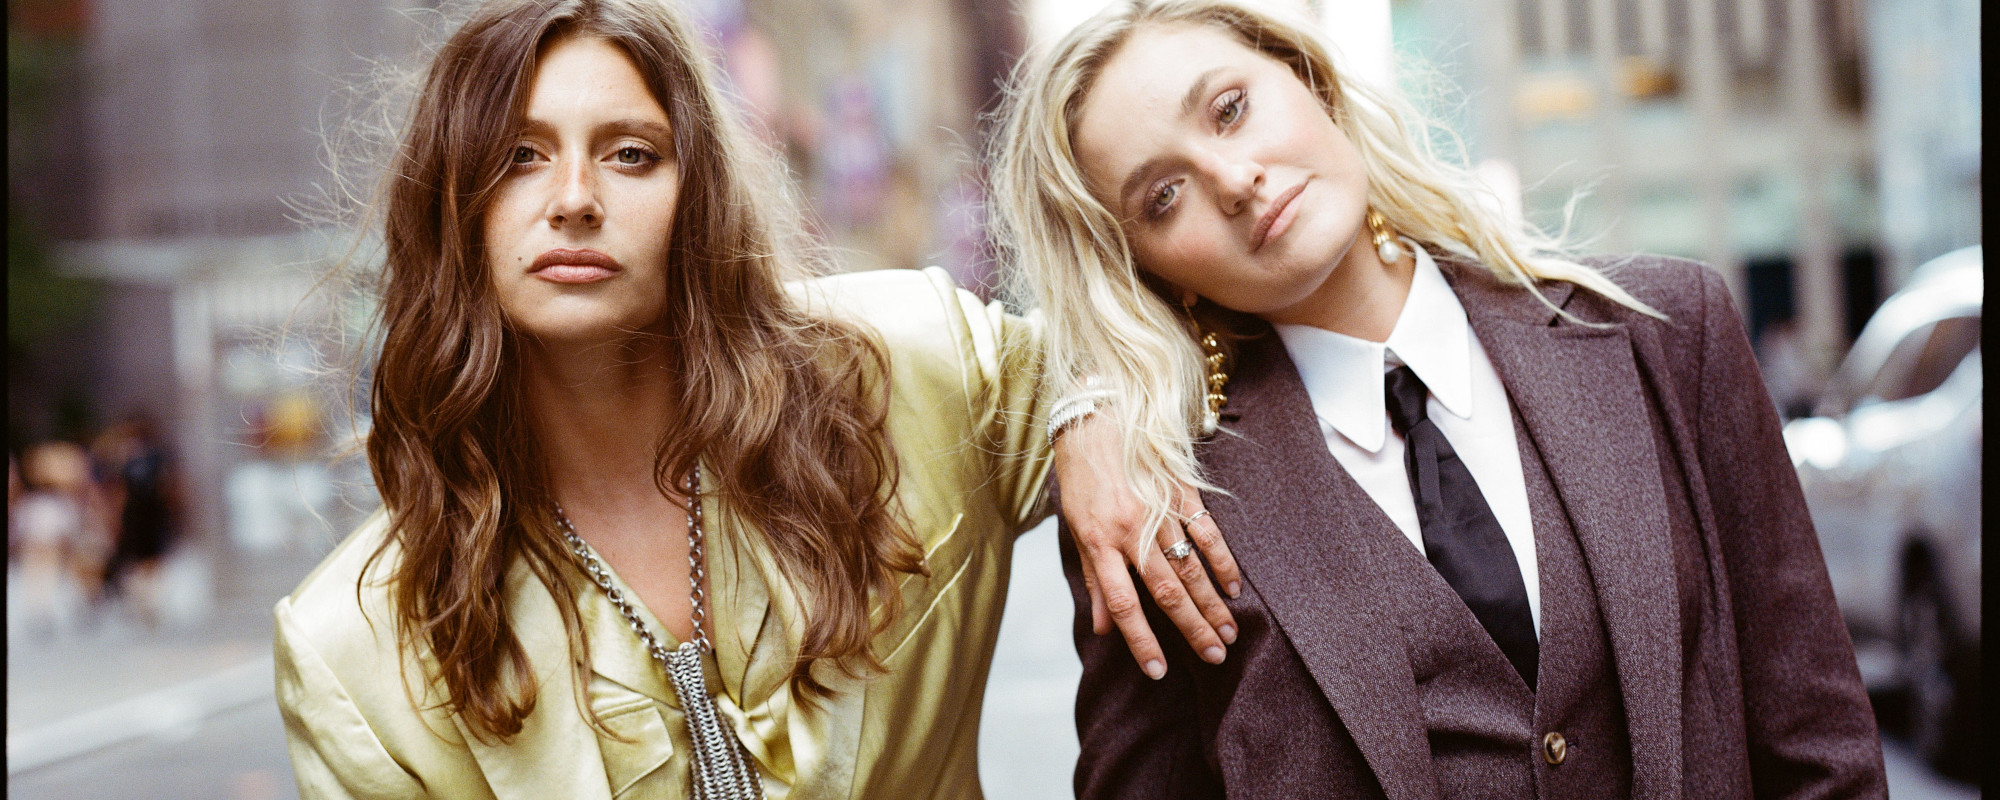 Aly & AJ to Headline Theaters on 2023 With Love From Tour